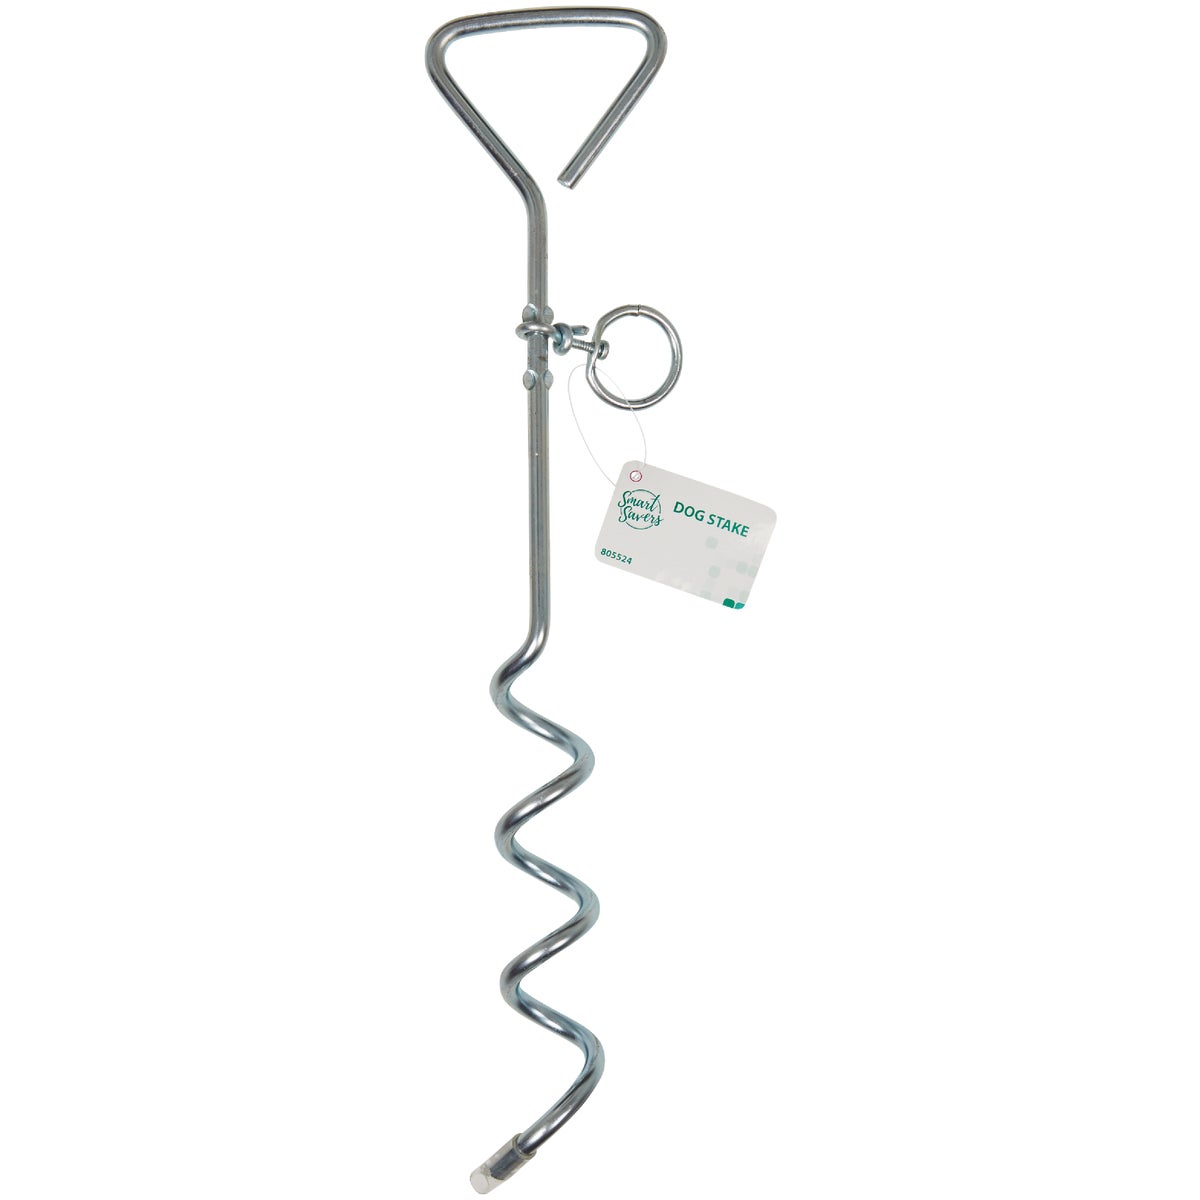 Item 805524, Smart Savers corkscrew style dog tie-out stake.